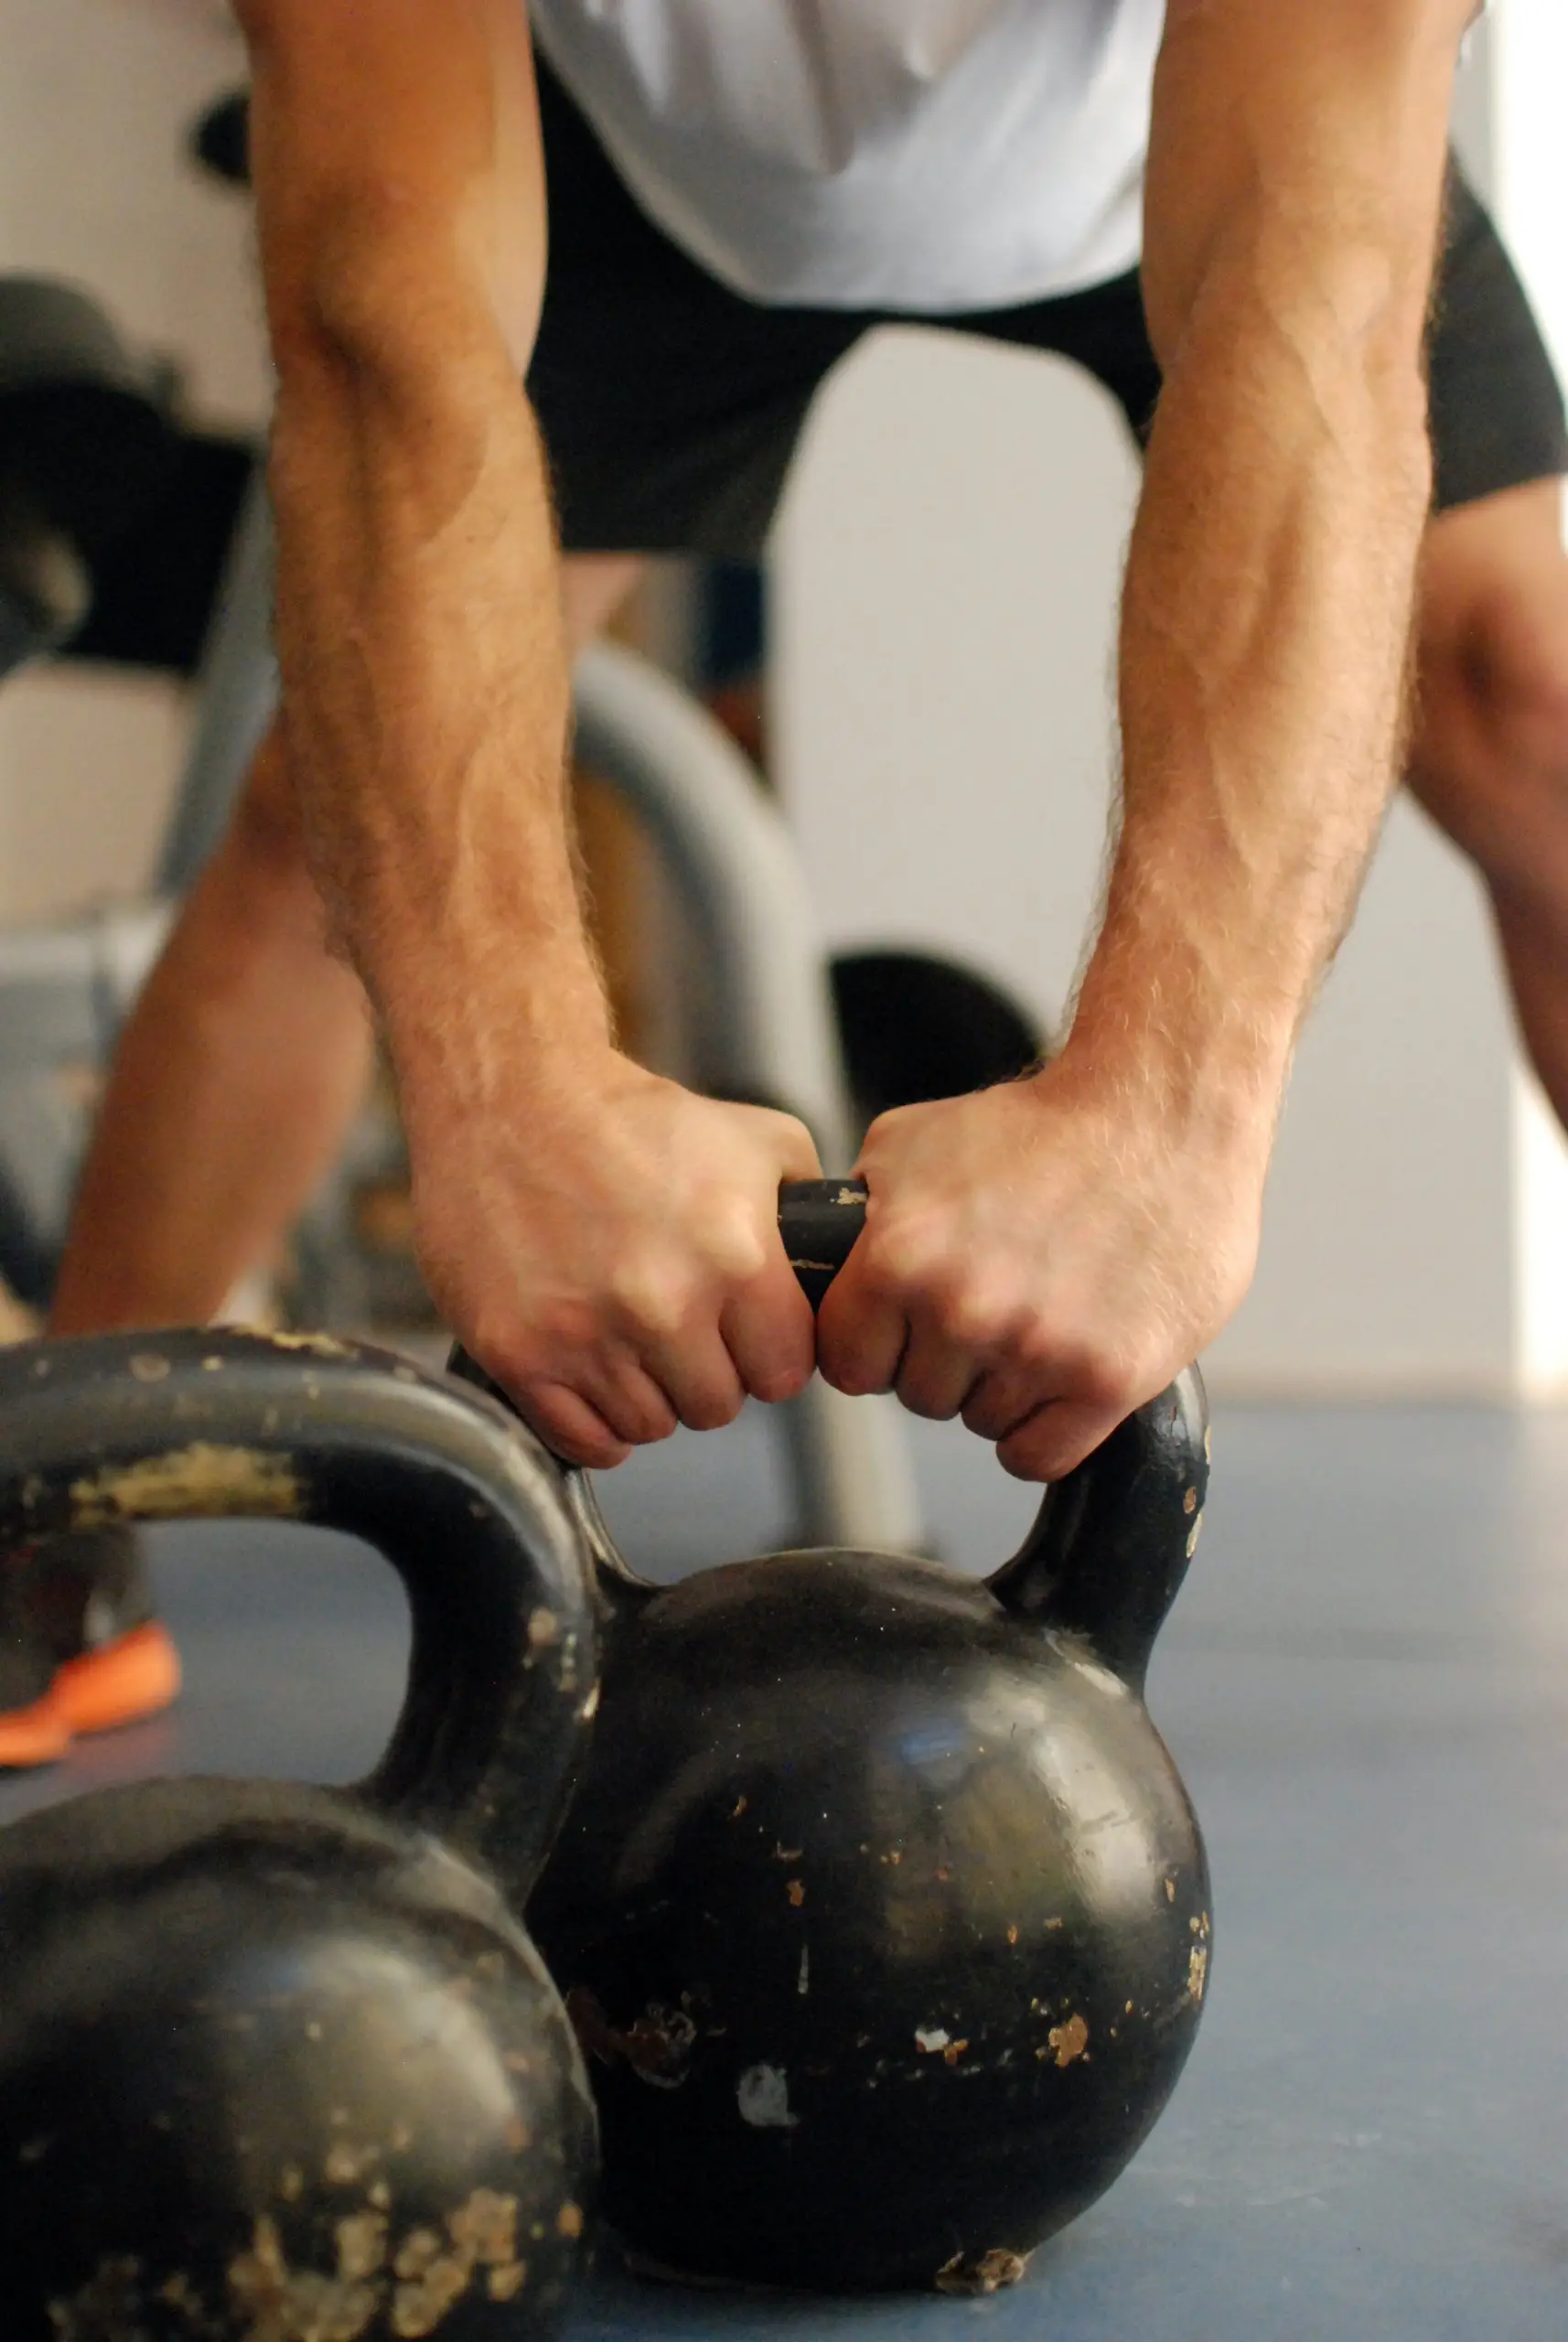 Man picking up a kettle bell to do a swing up exercise